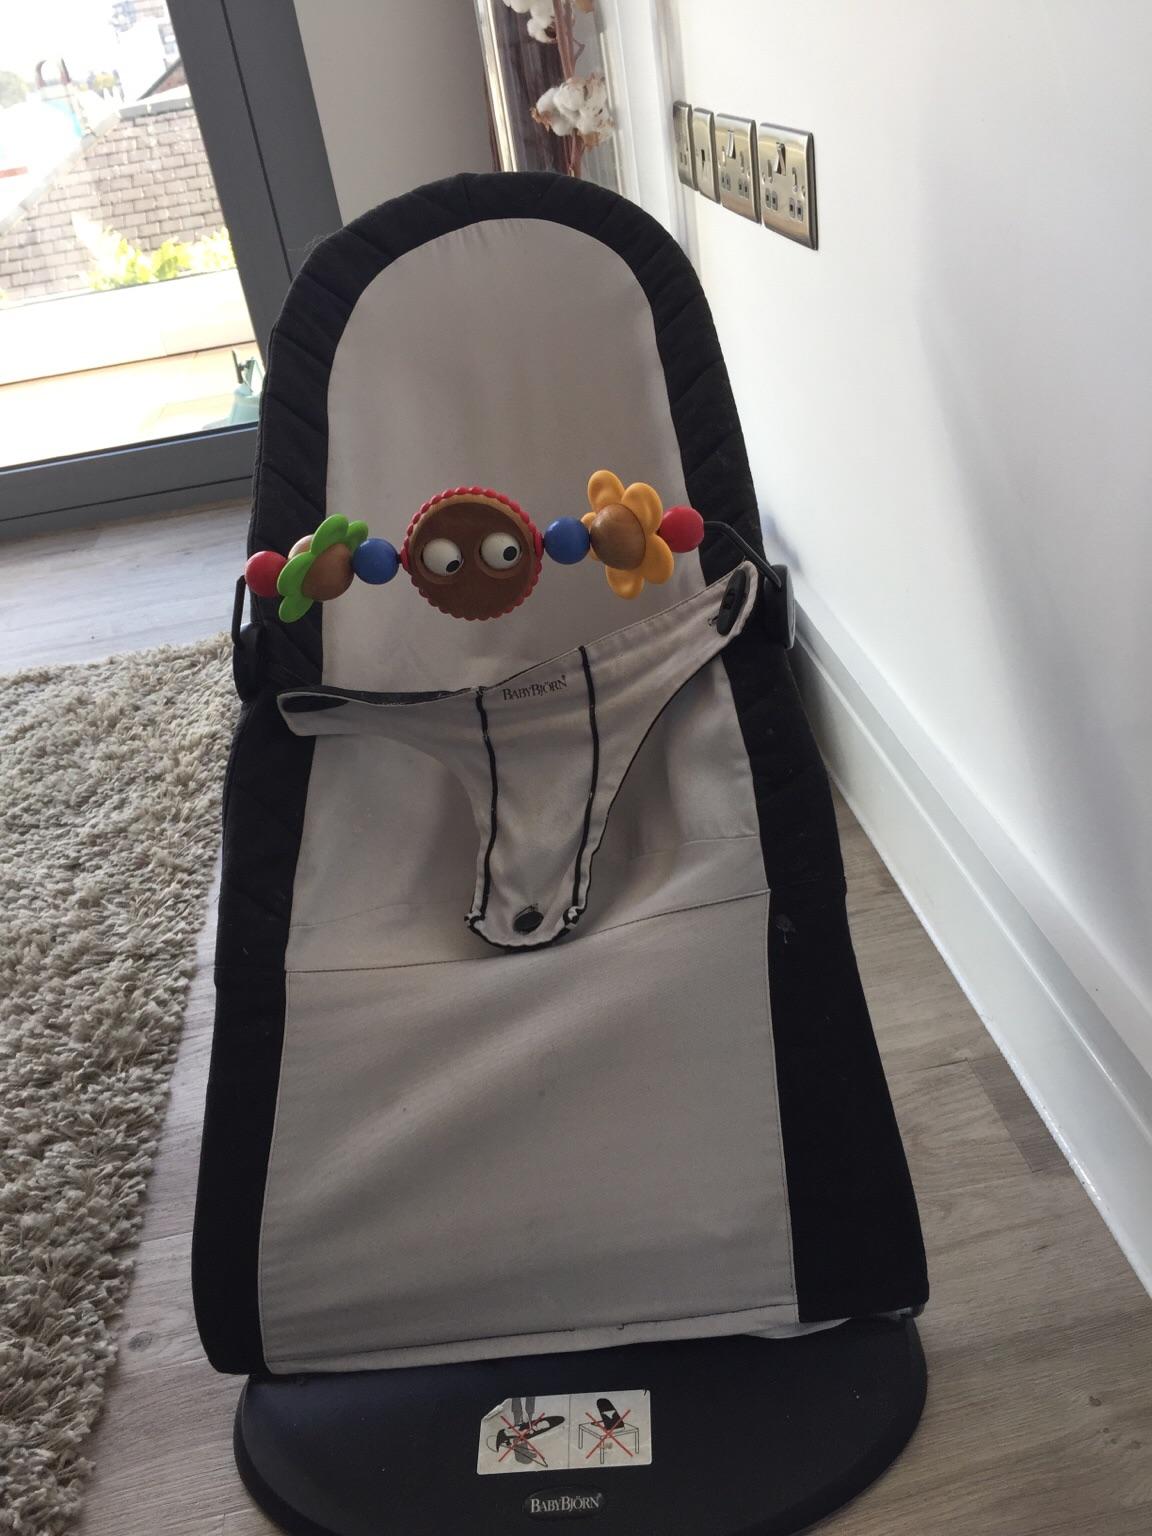 Baby Bjorn Bouncer in E8 London for £20 